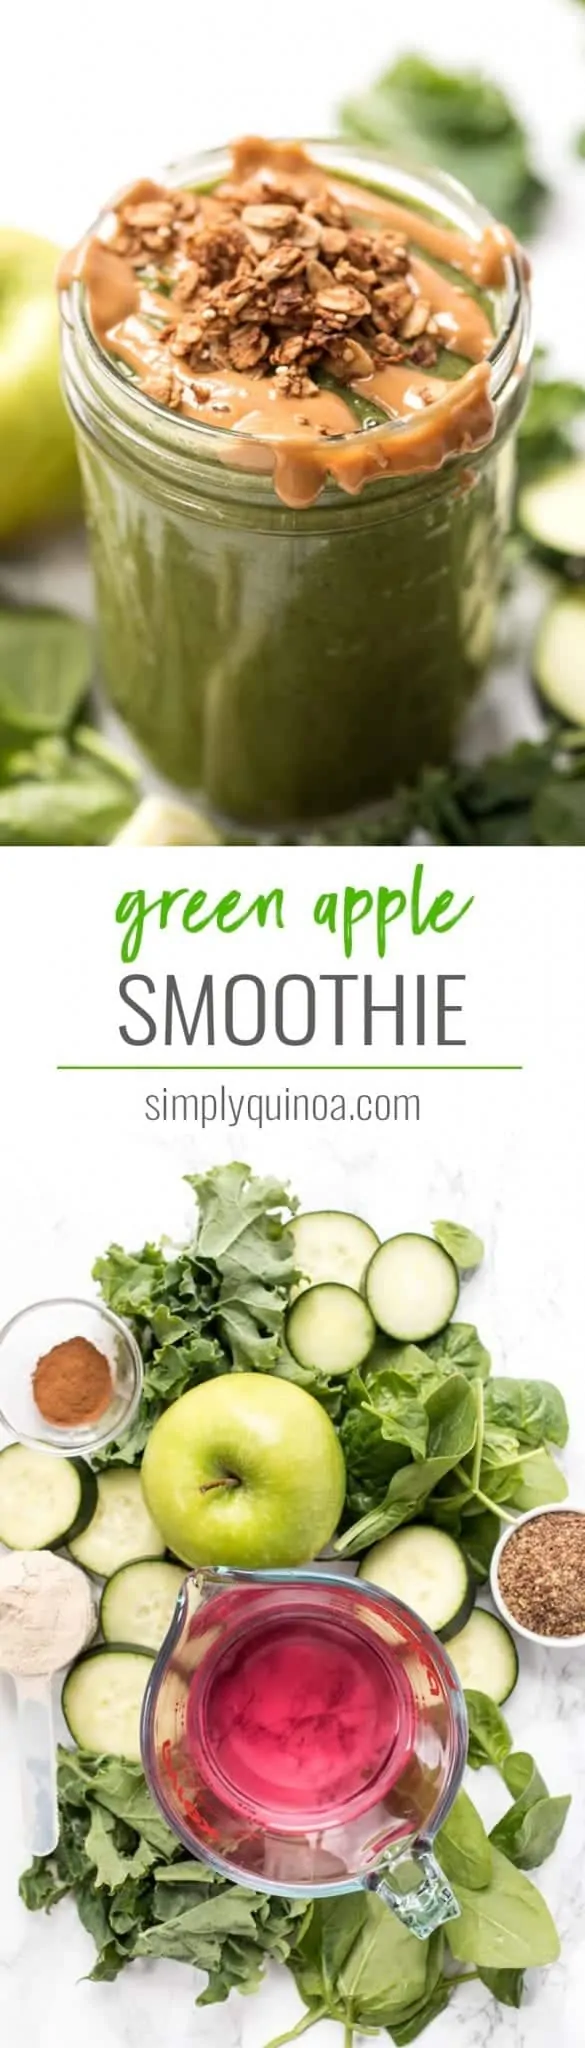 green apple smoothie recipe with protein and fiber